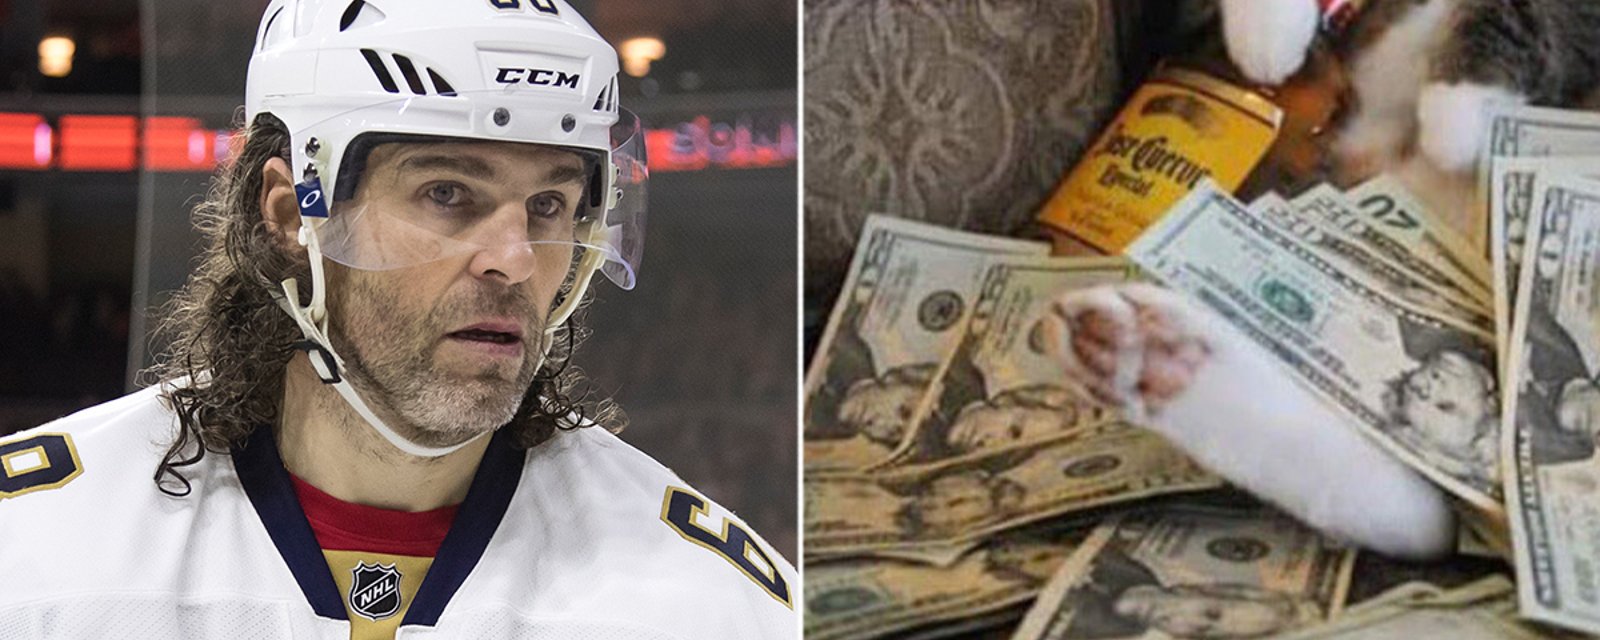 Must See: Jagr’s cat wins the Internet with viral photo